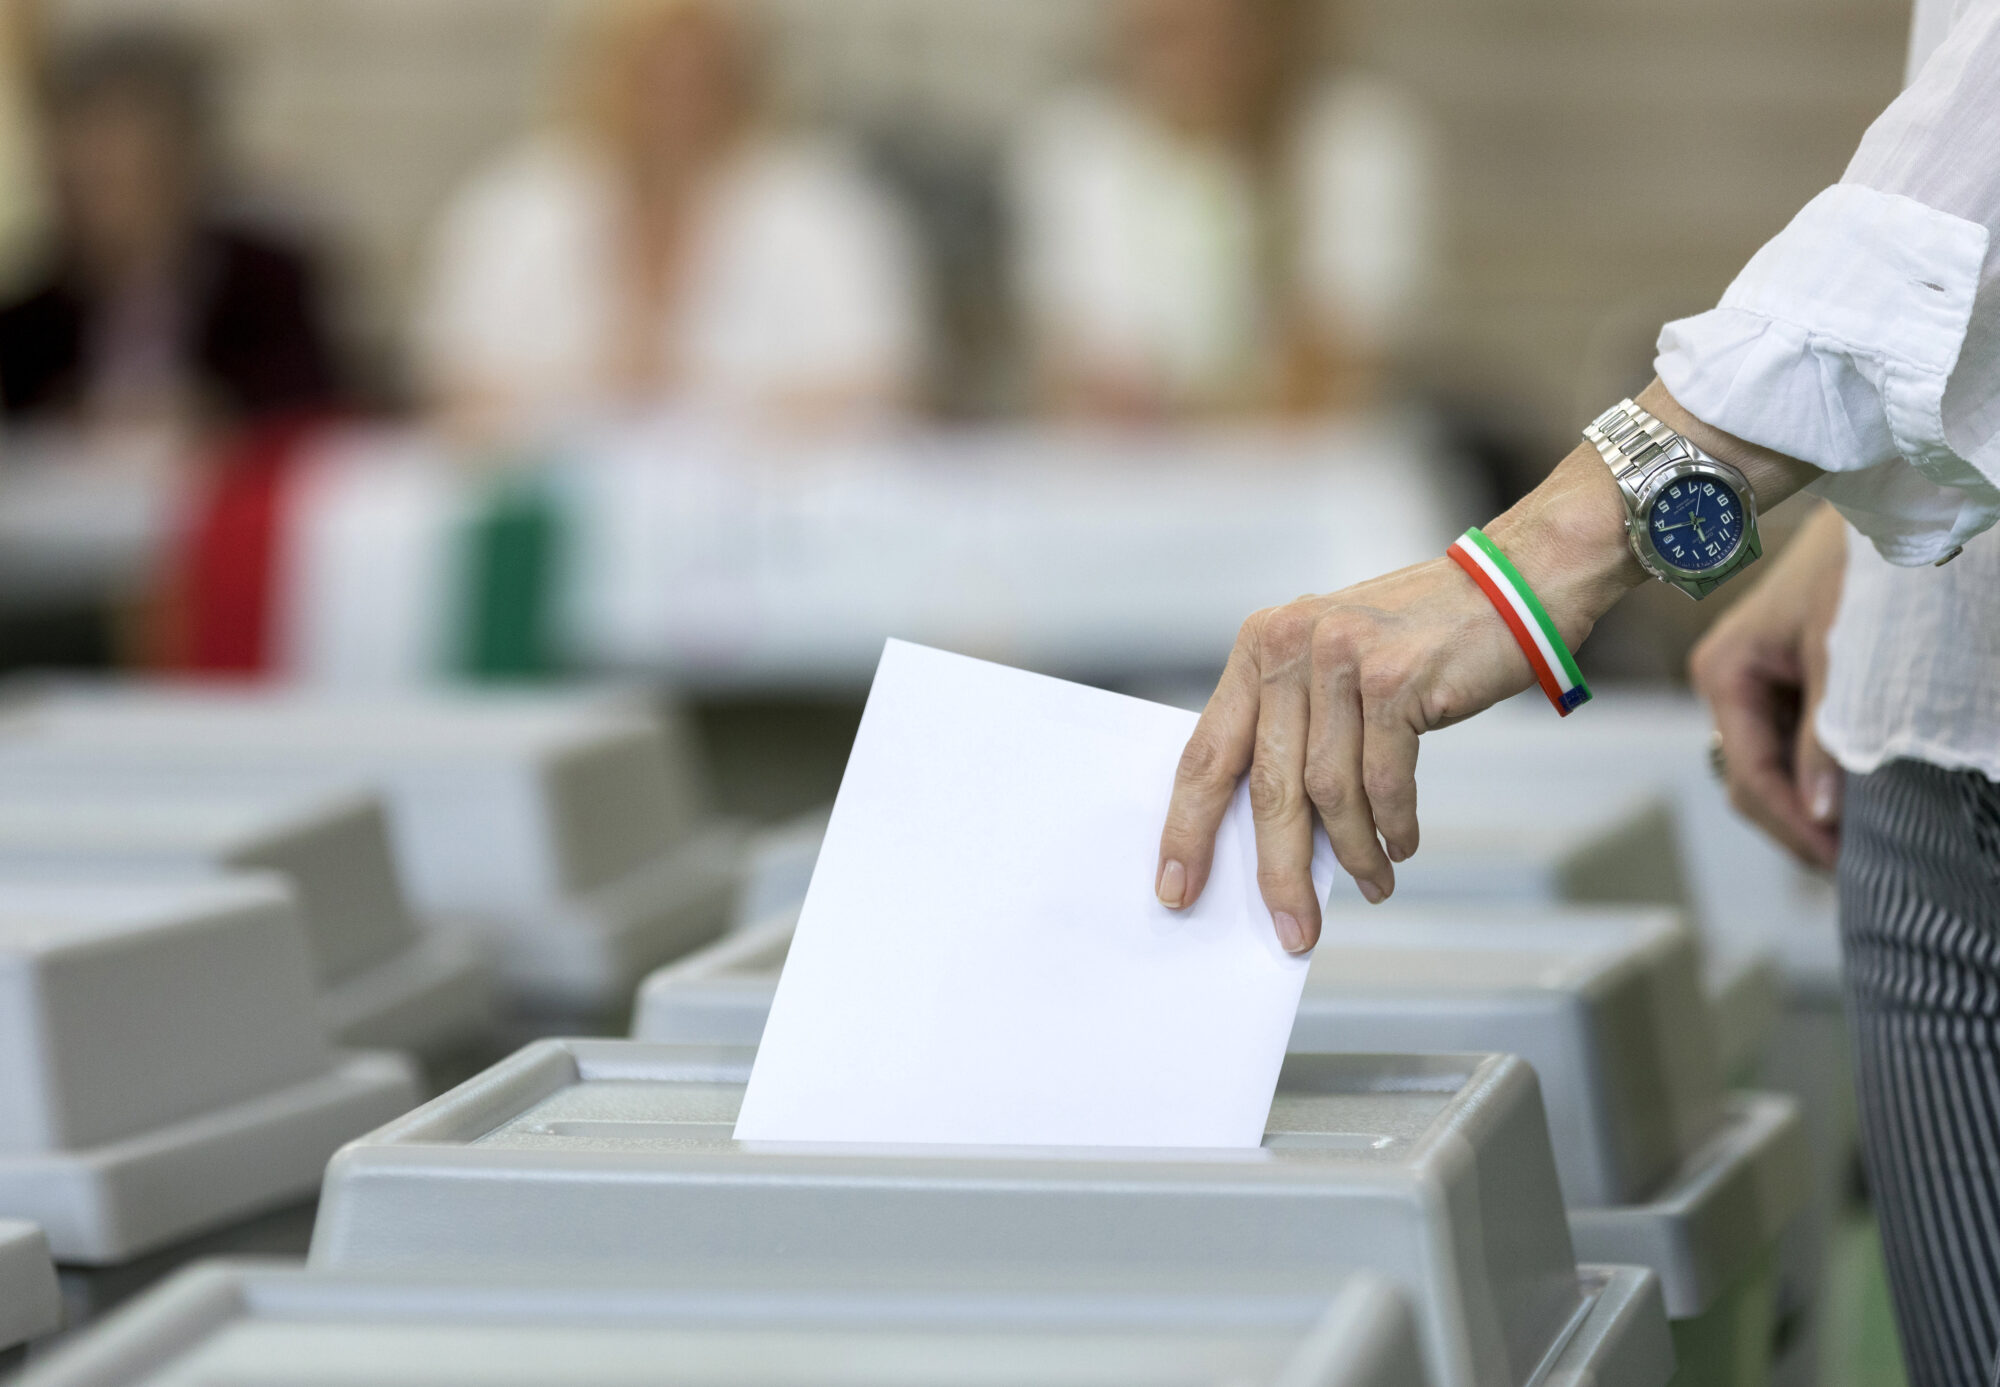 FIDESZ-KDNP MAINTAINS LEAD AHEAD OF OPPOSITION ALLIANCE